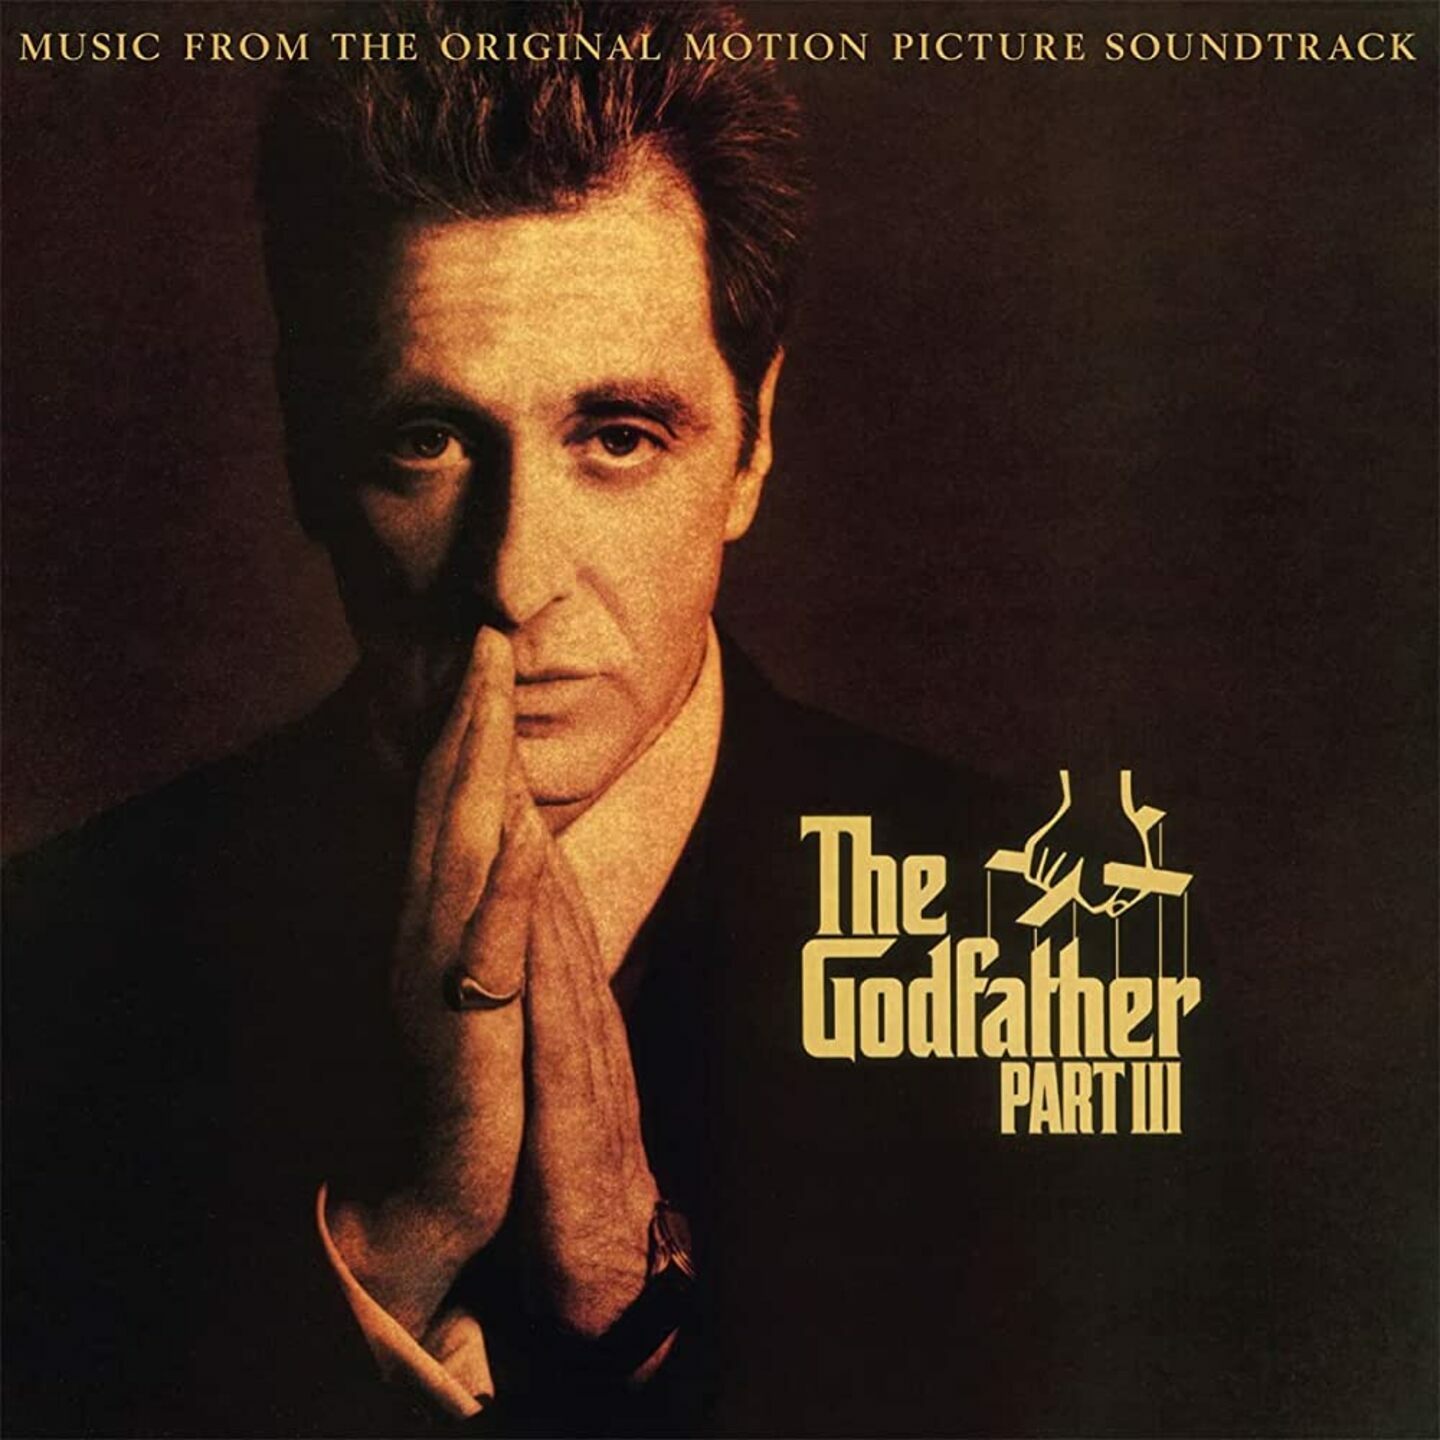 VA - The Godfather III Music From The Original Motion Picture Soundtrack LP 180g Silver & Black Vinyl